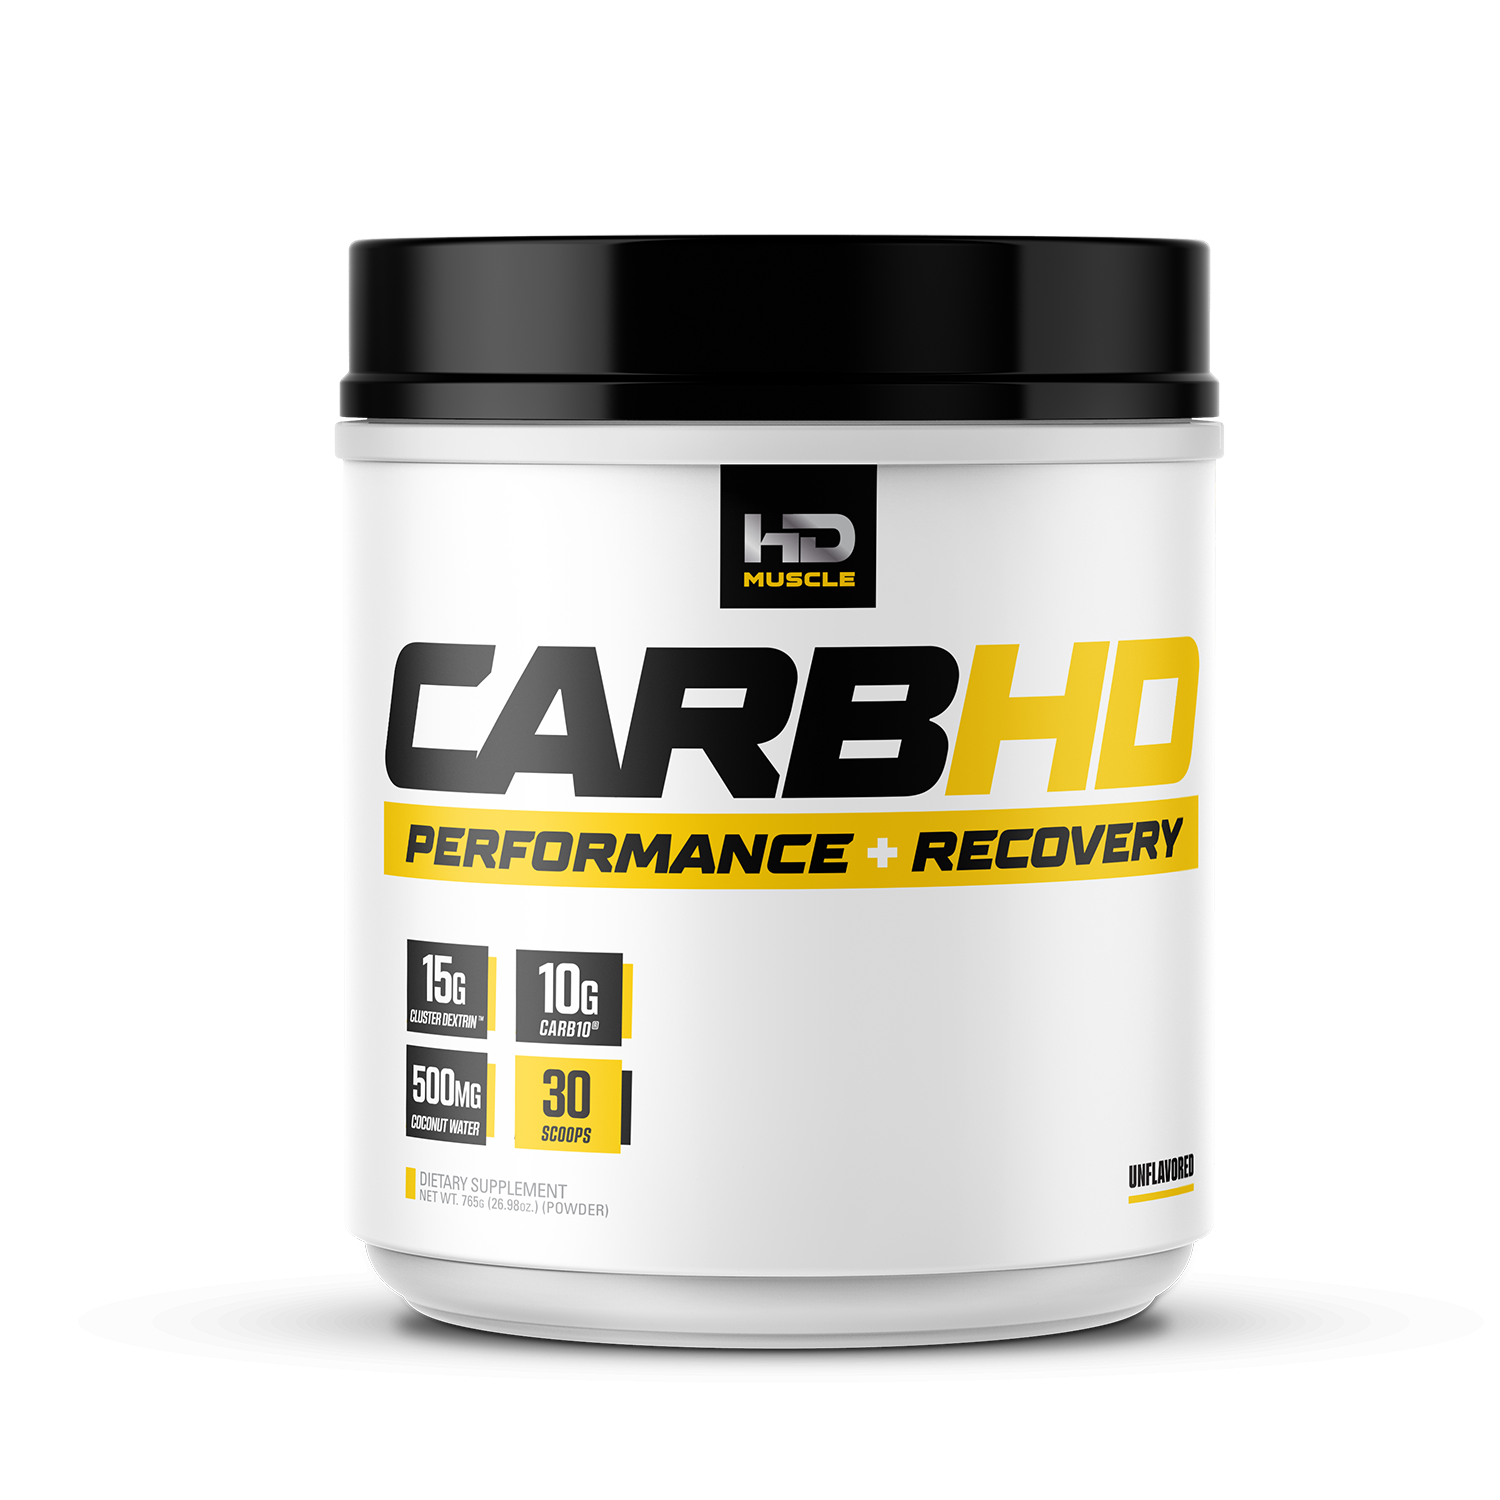 HD Muscle CarbHD